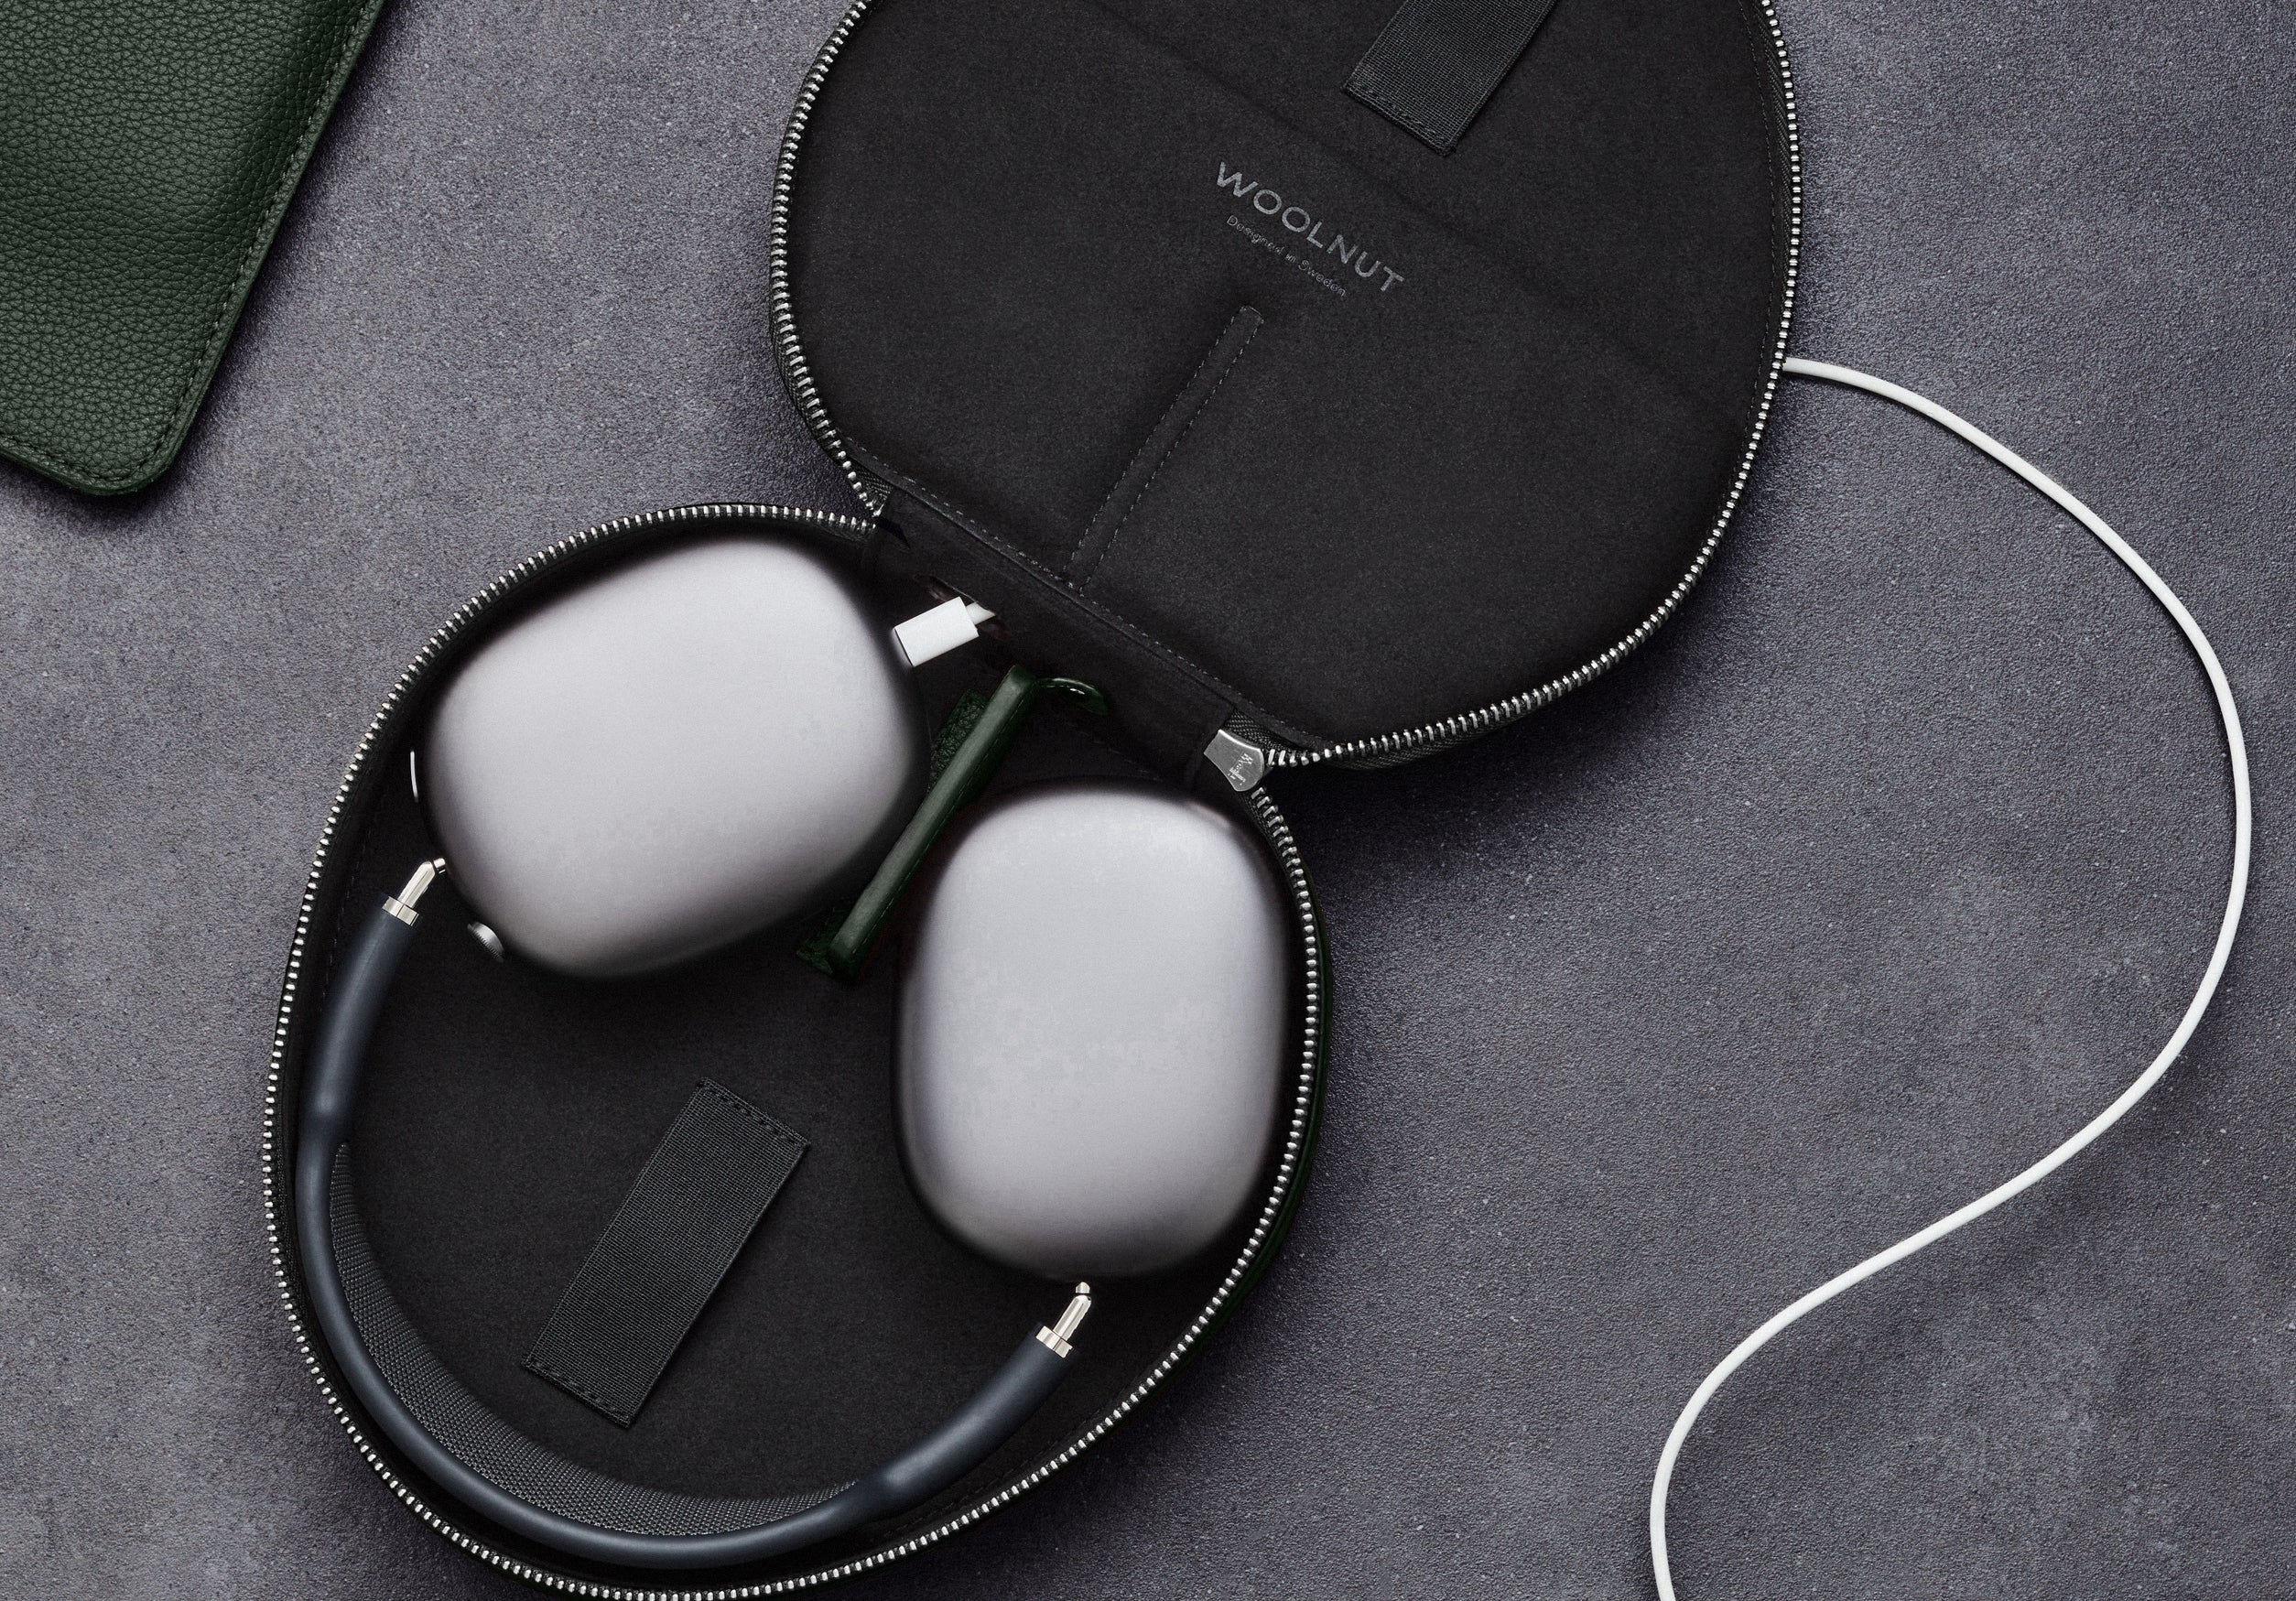 A Woolnut Case for AirPods Max on the table